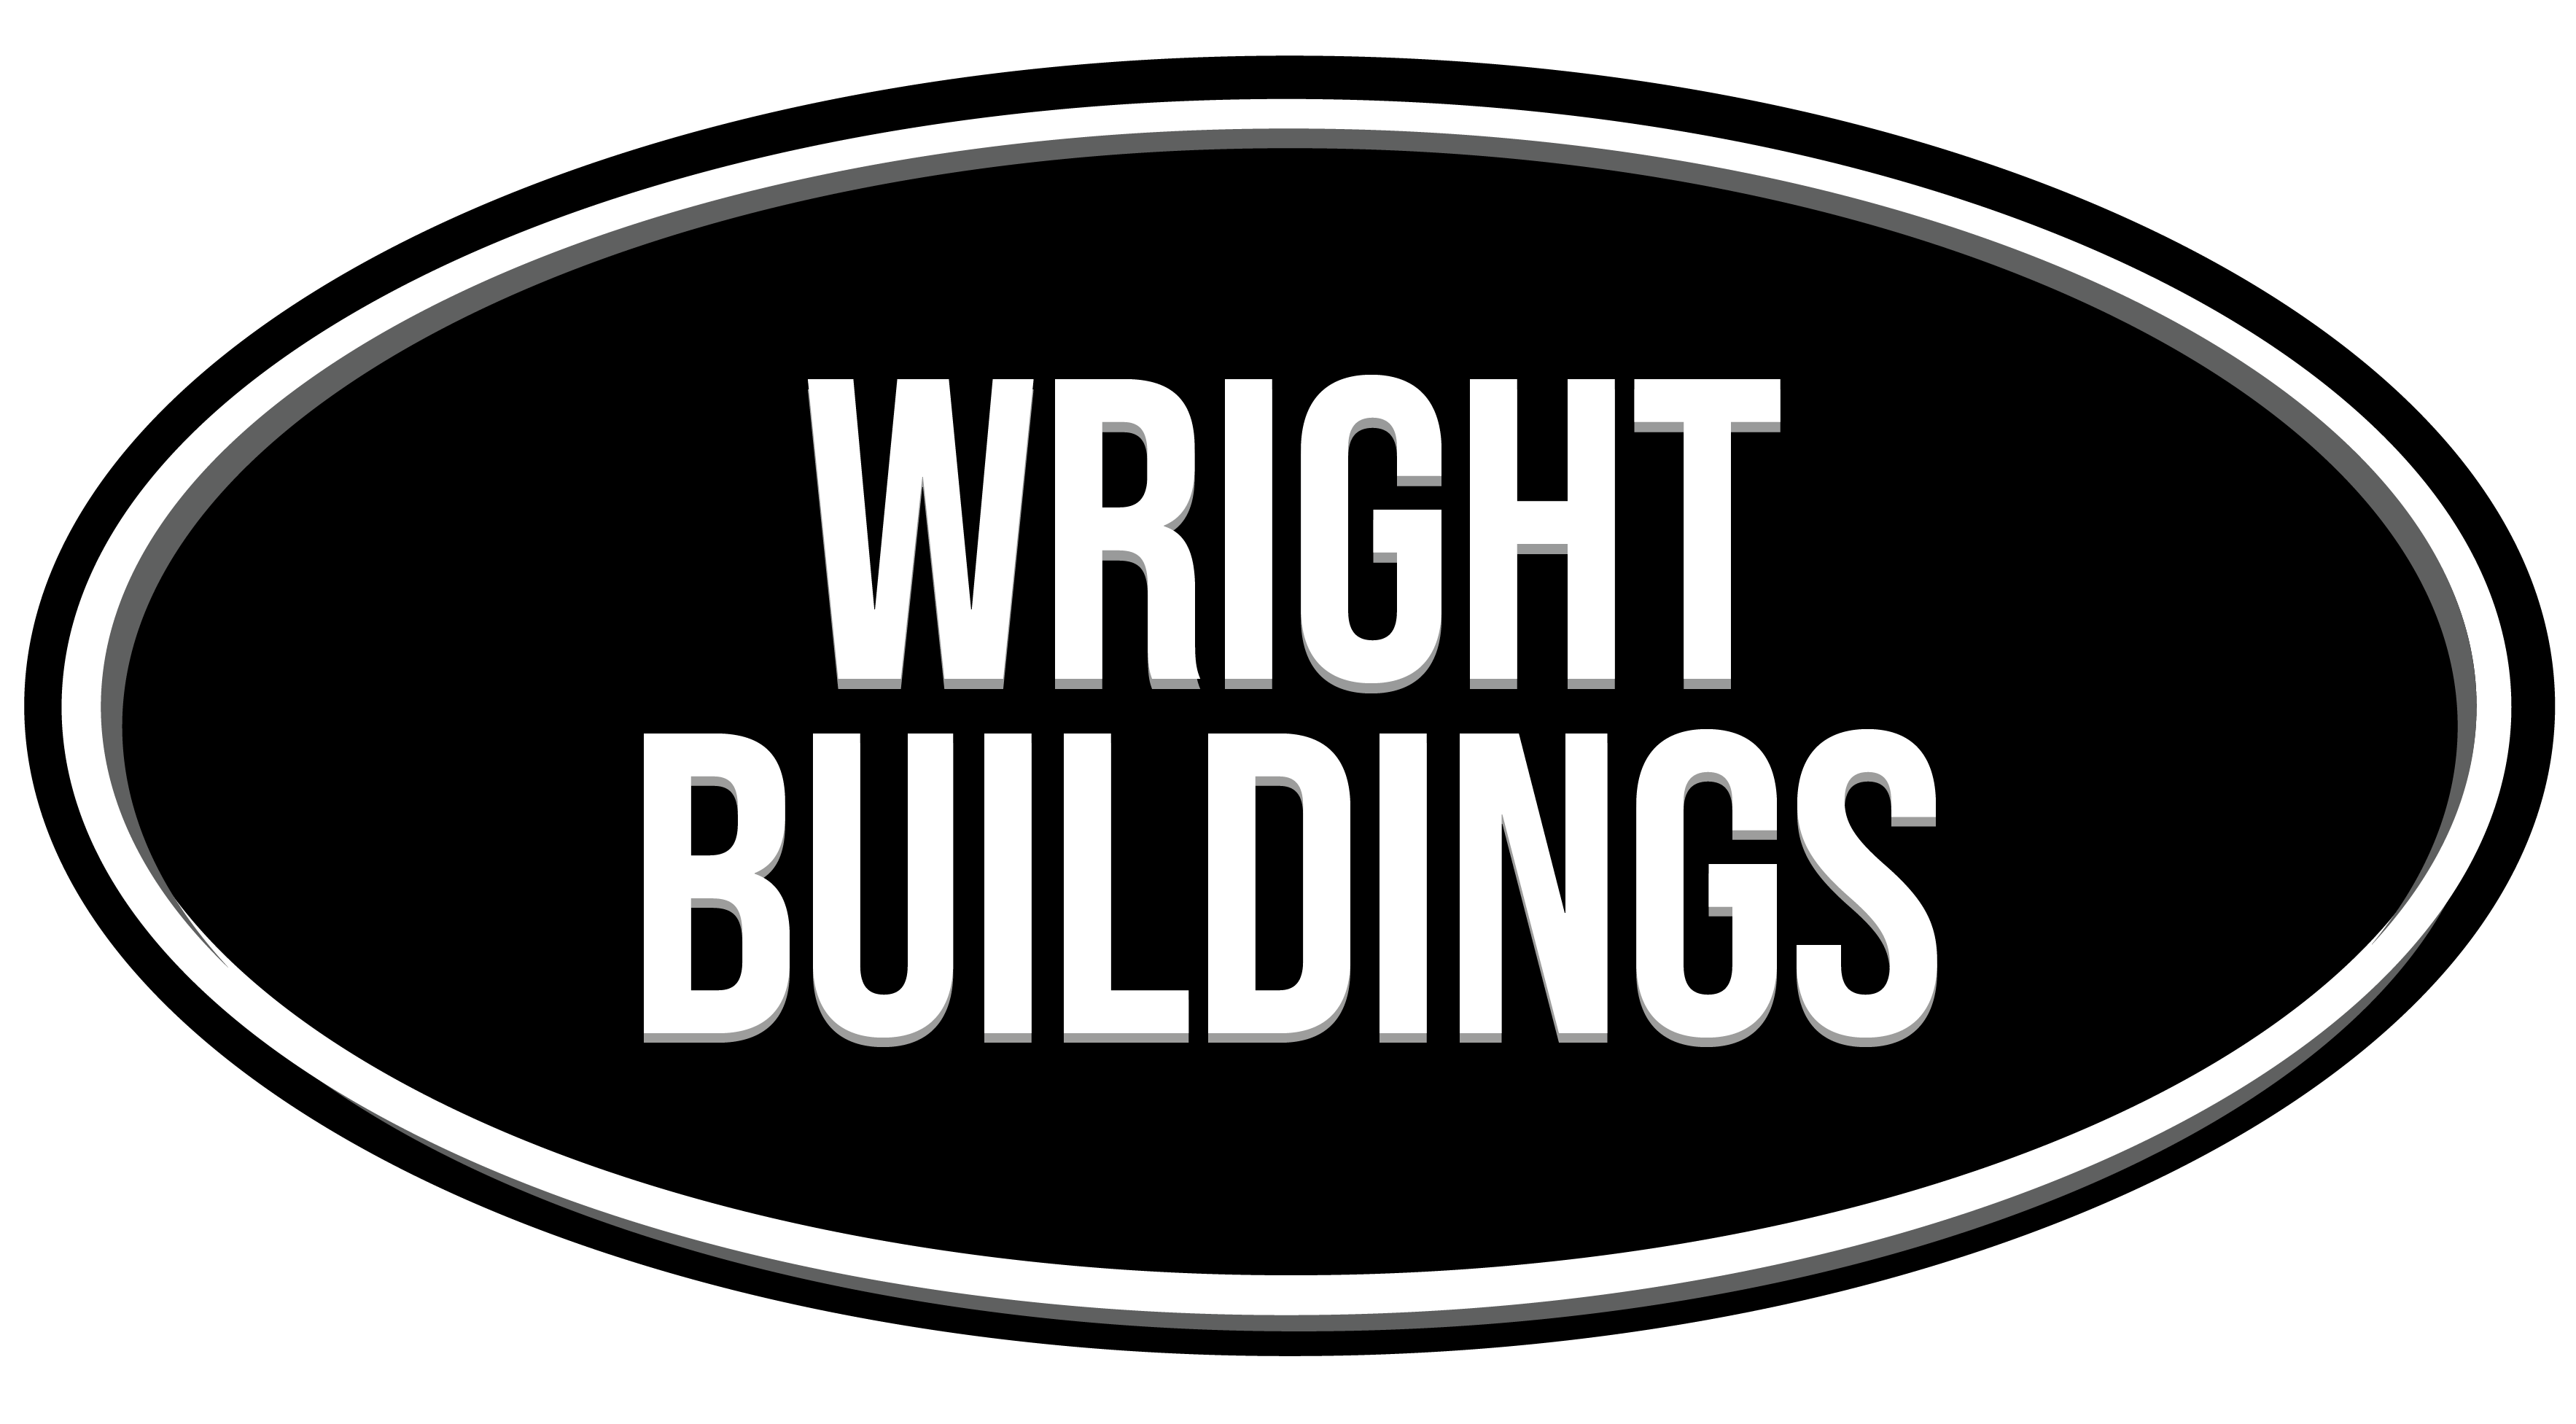 Wright's Buildings